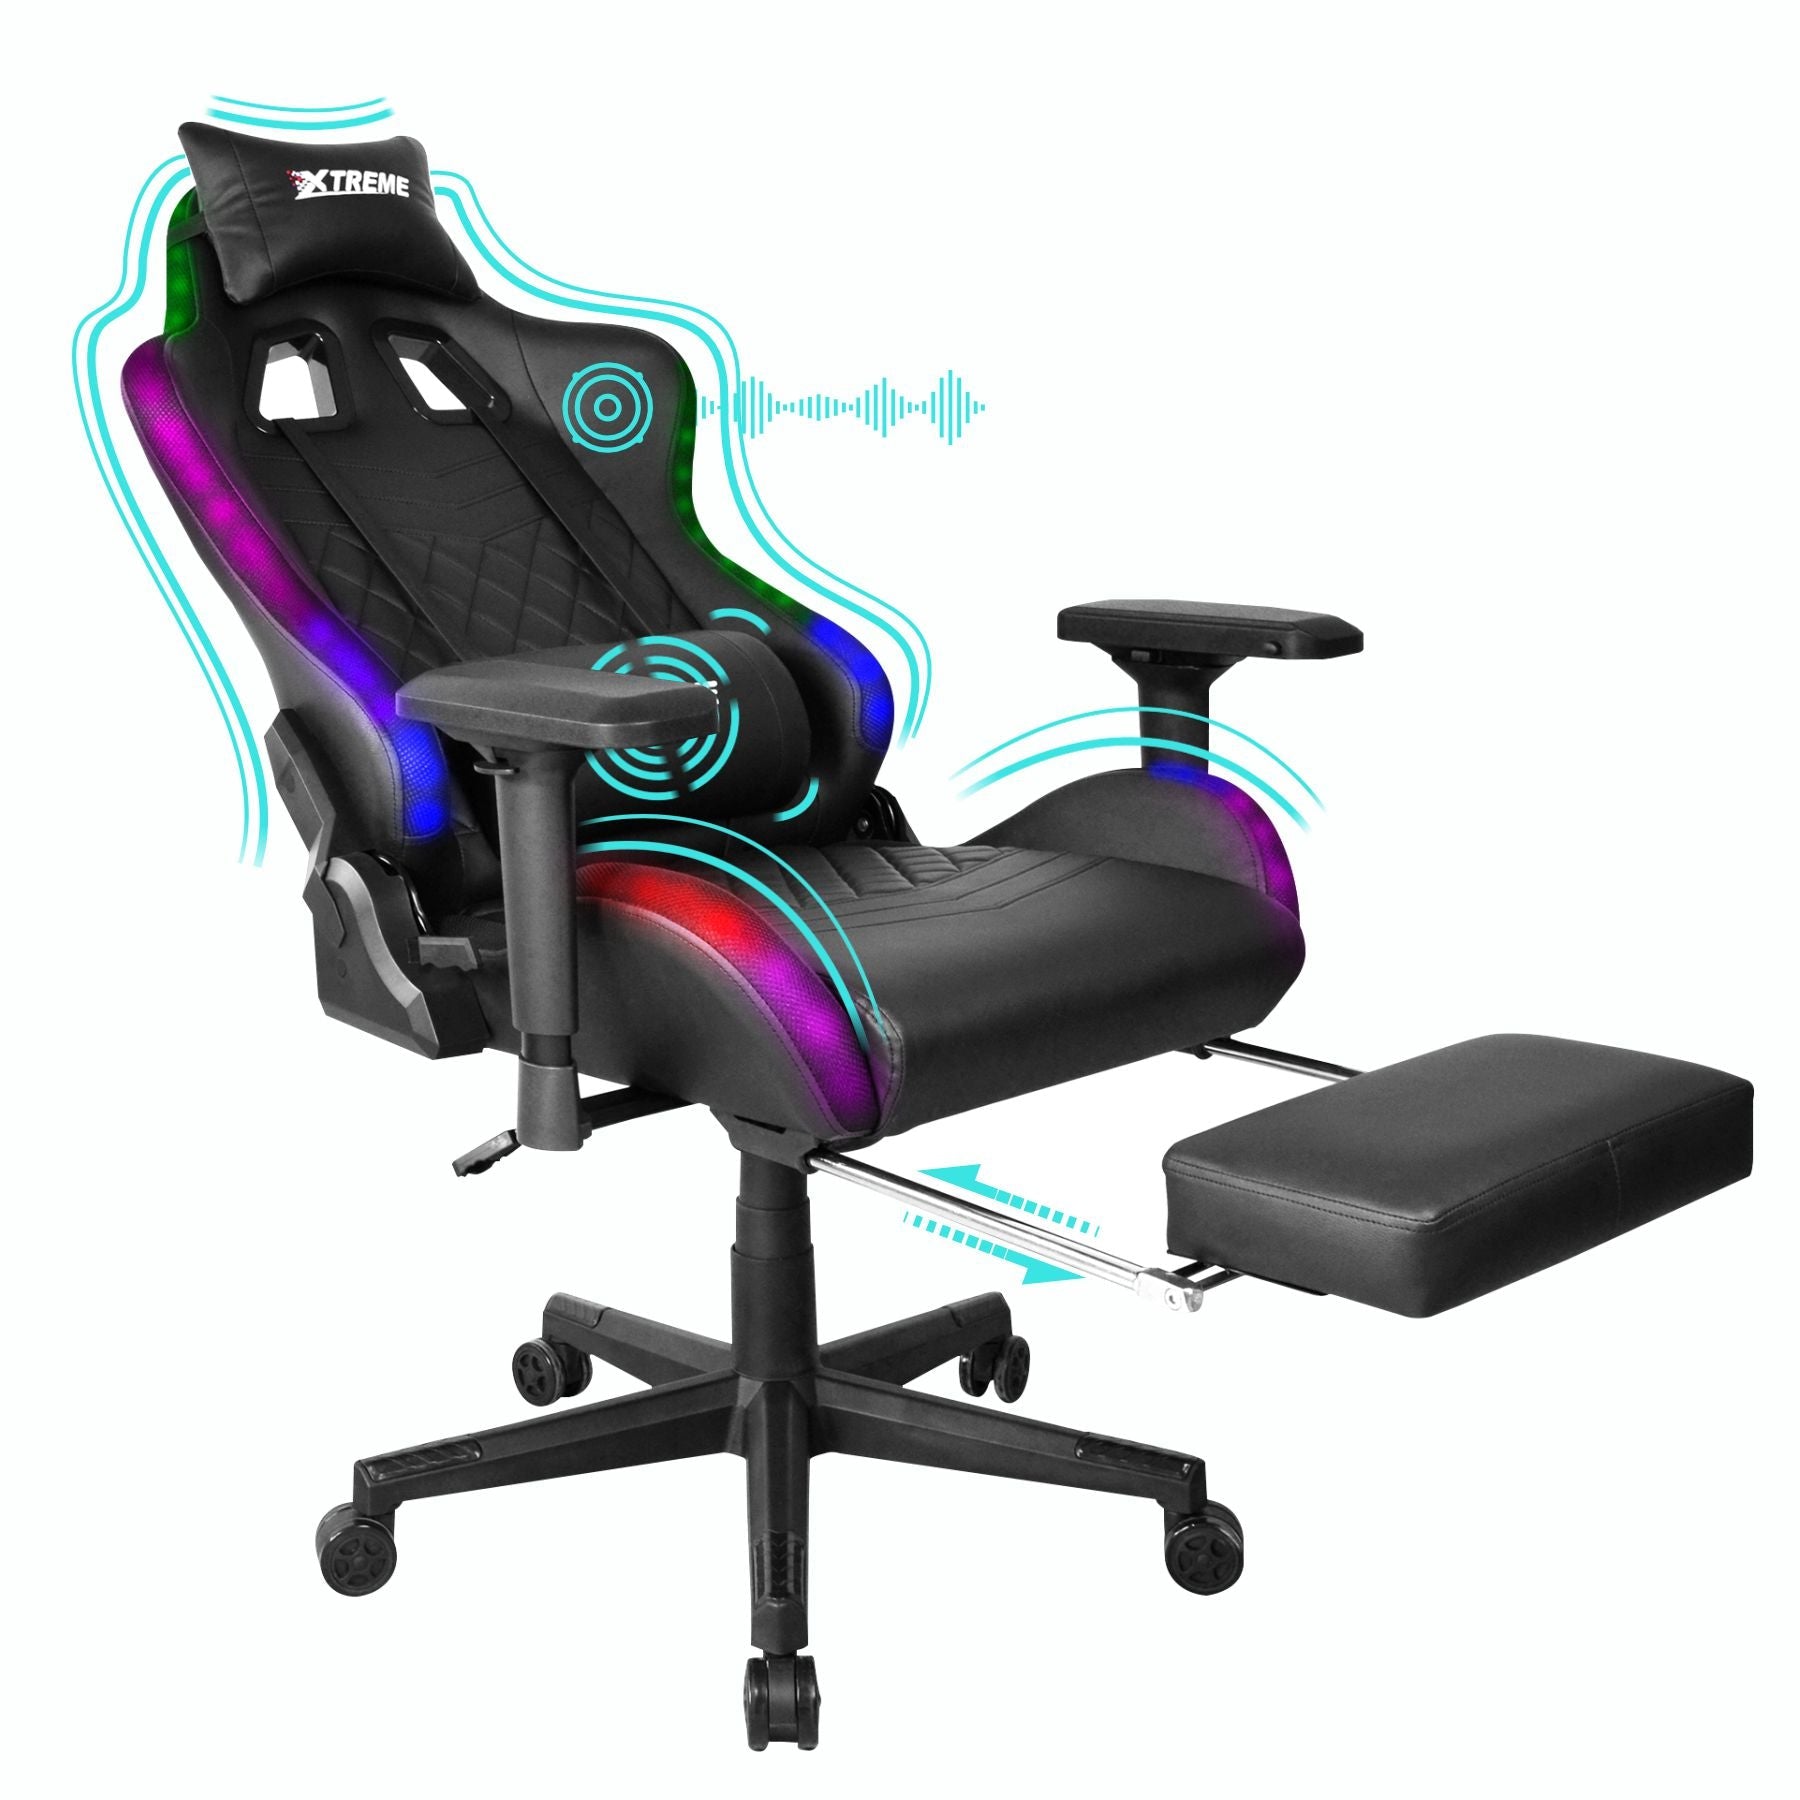 http://www.packeddirect.com/cdn/shop/products/olsen-smith-xtreme-engage-premium-ergonomic-gaming-chair-with-lumbar-support-3d-adjustable-armrest-head-pillow-retractable-footrest-bluetooth-speakers-rgb-led-l-524488.jpg?v=1699050469